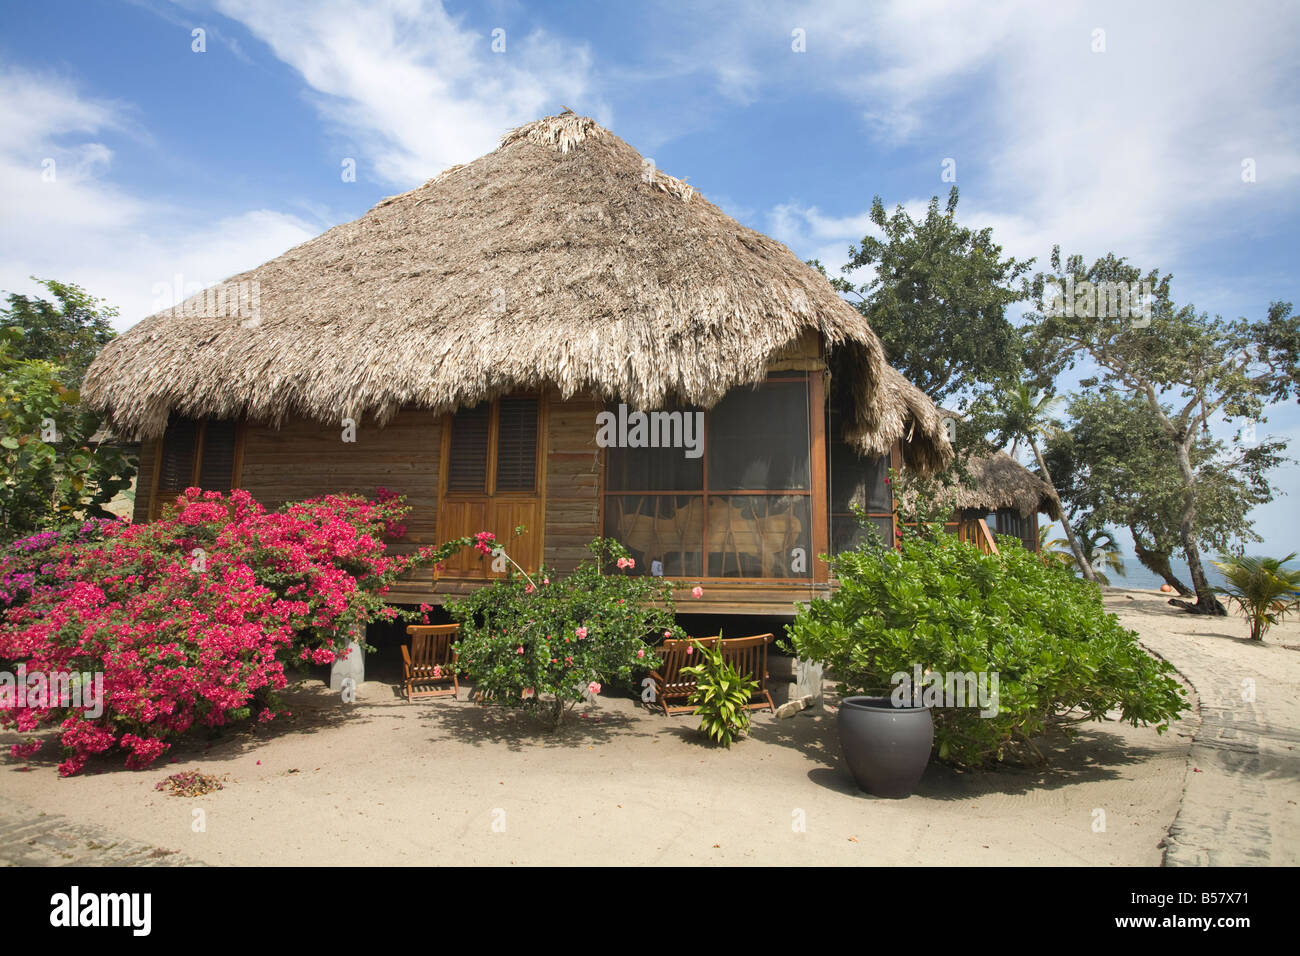 Thatched cottage at The Turtle Inn Francis Ford Cappola s beach front hotel Placencia Belize Central America Stock Photo